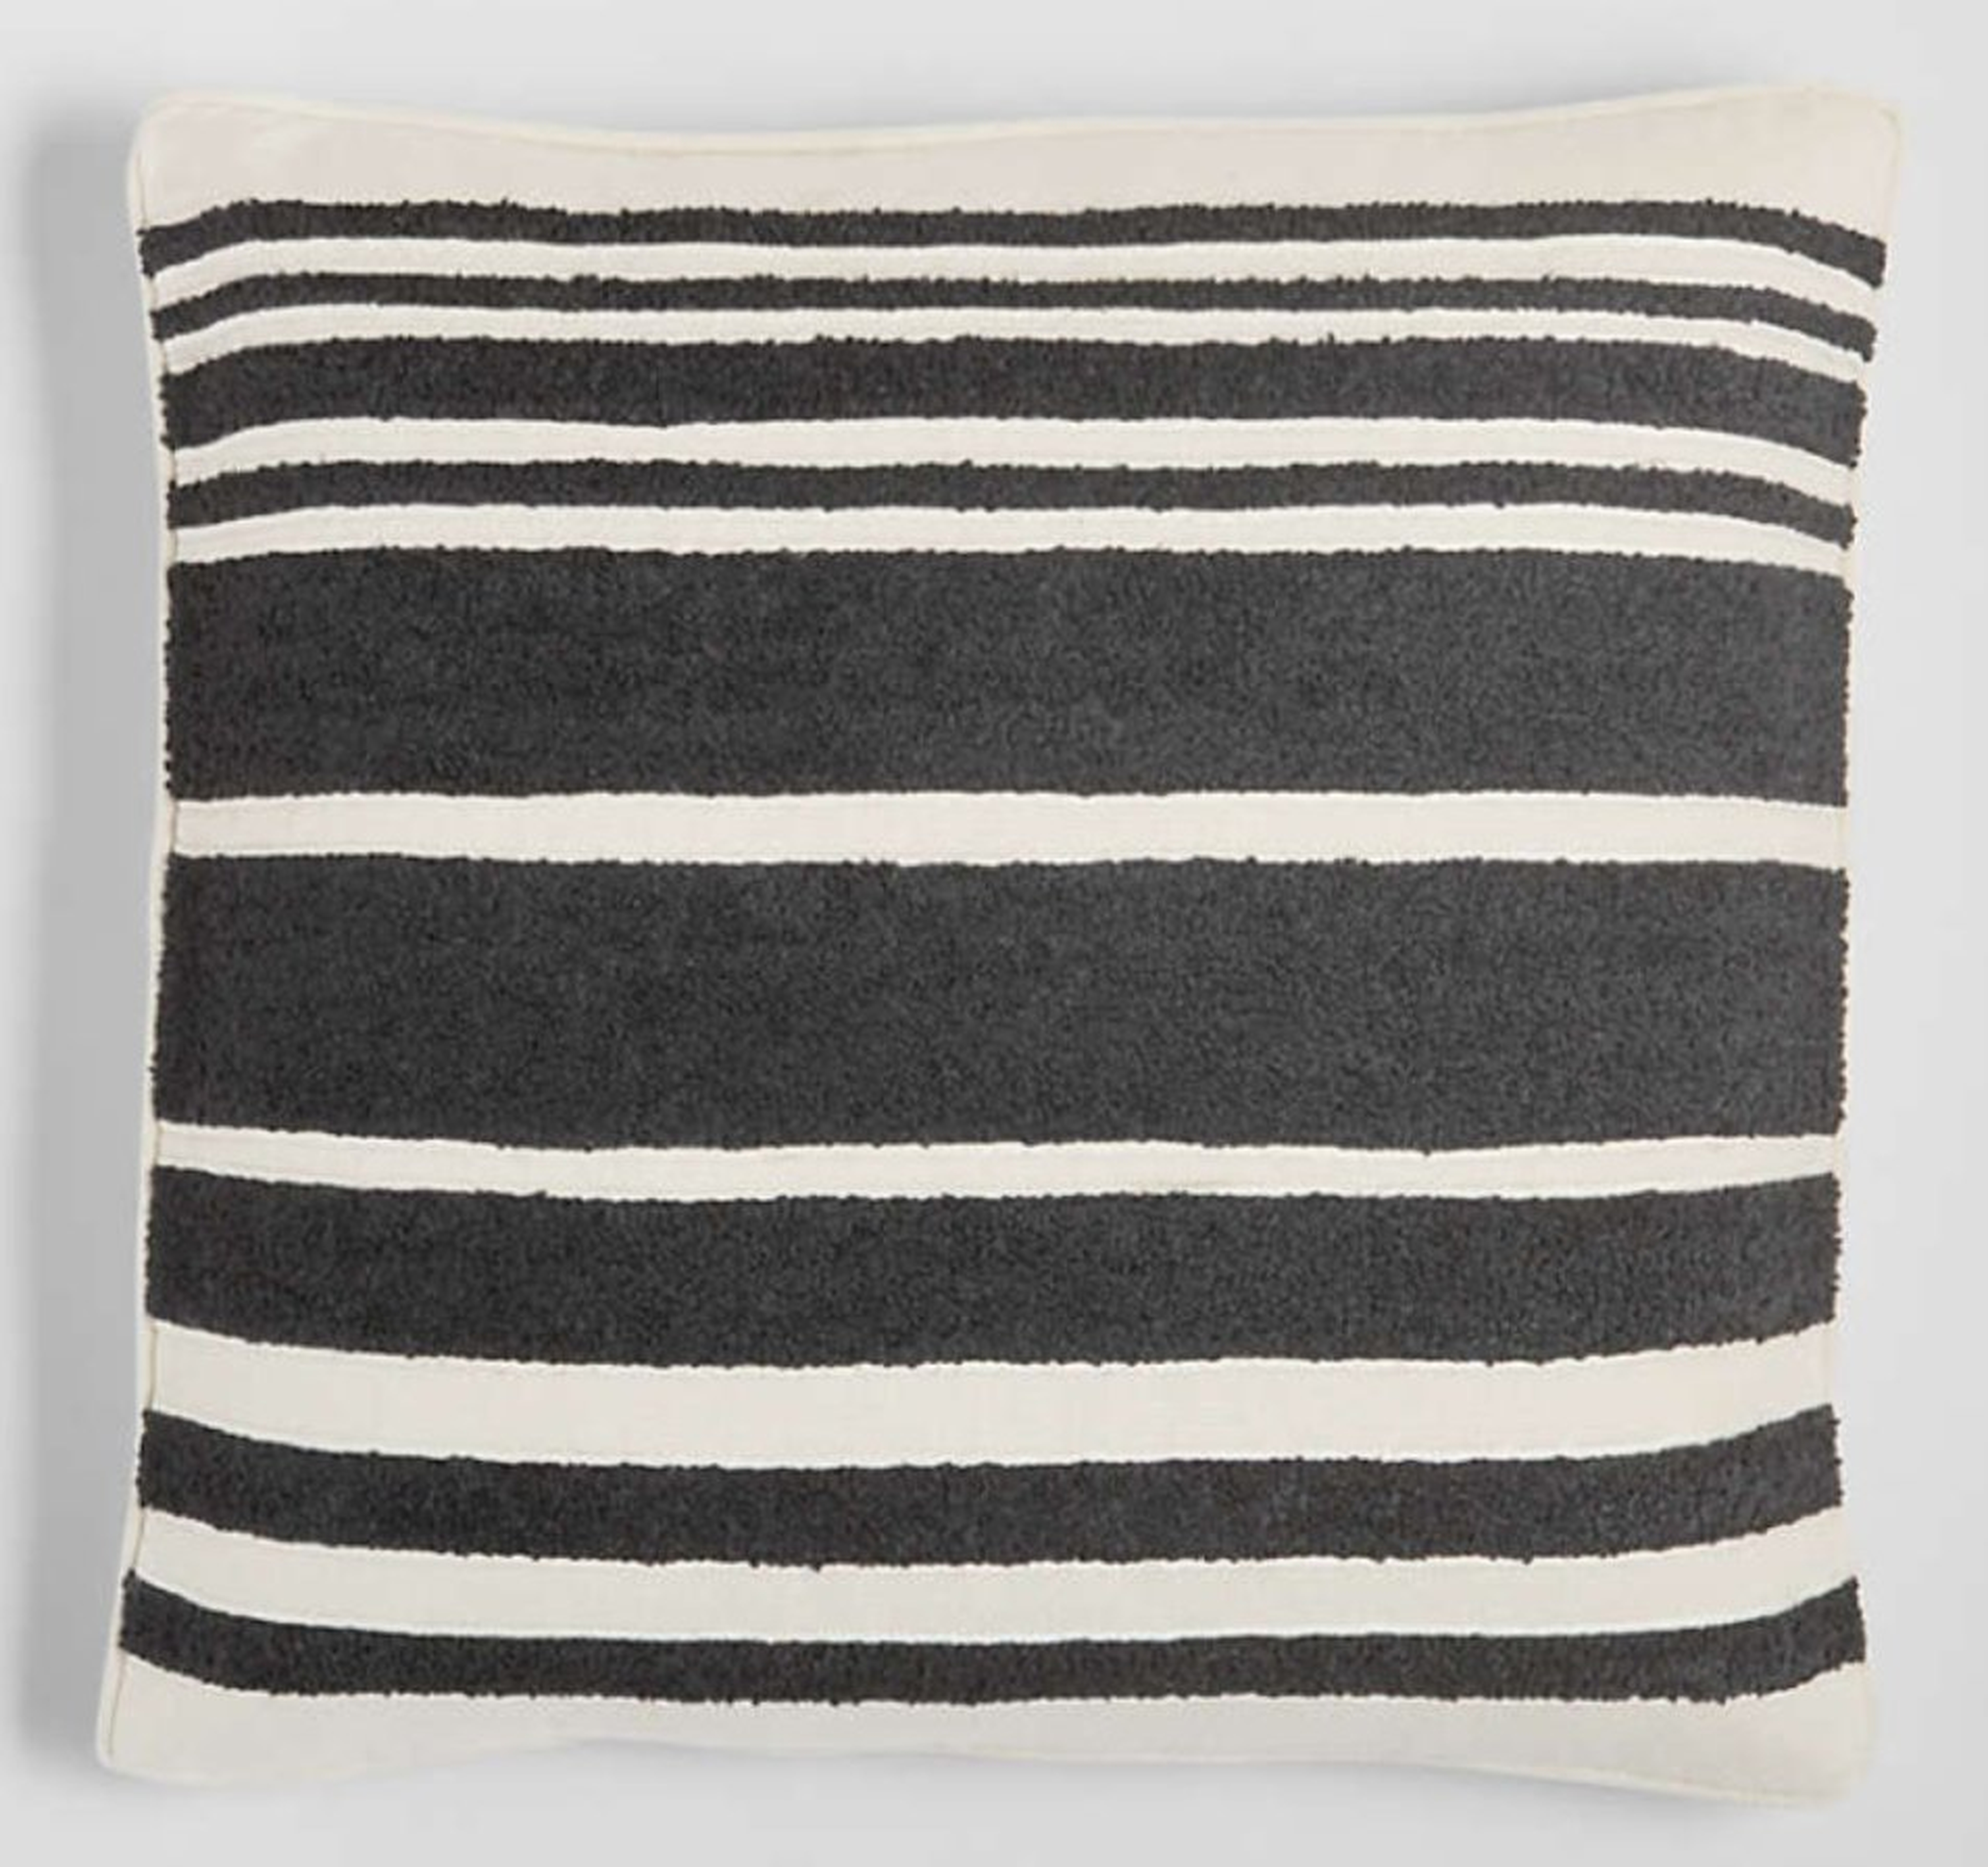 Mohave 20"x20" Wide Black Stripe Indoor/Outdoor Pillow - Crate and Barrel